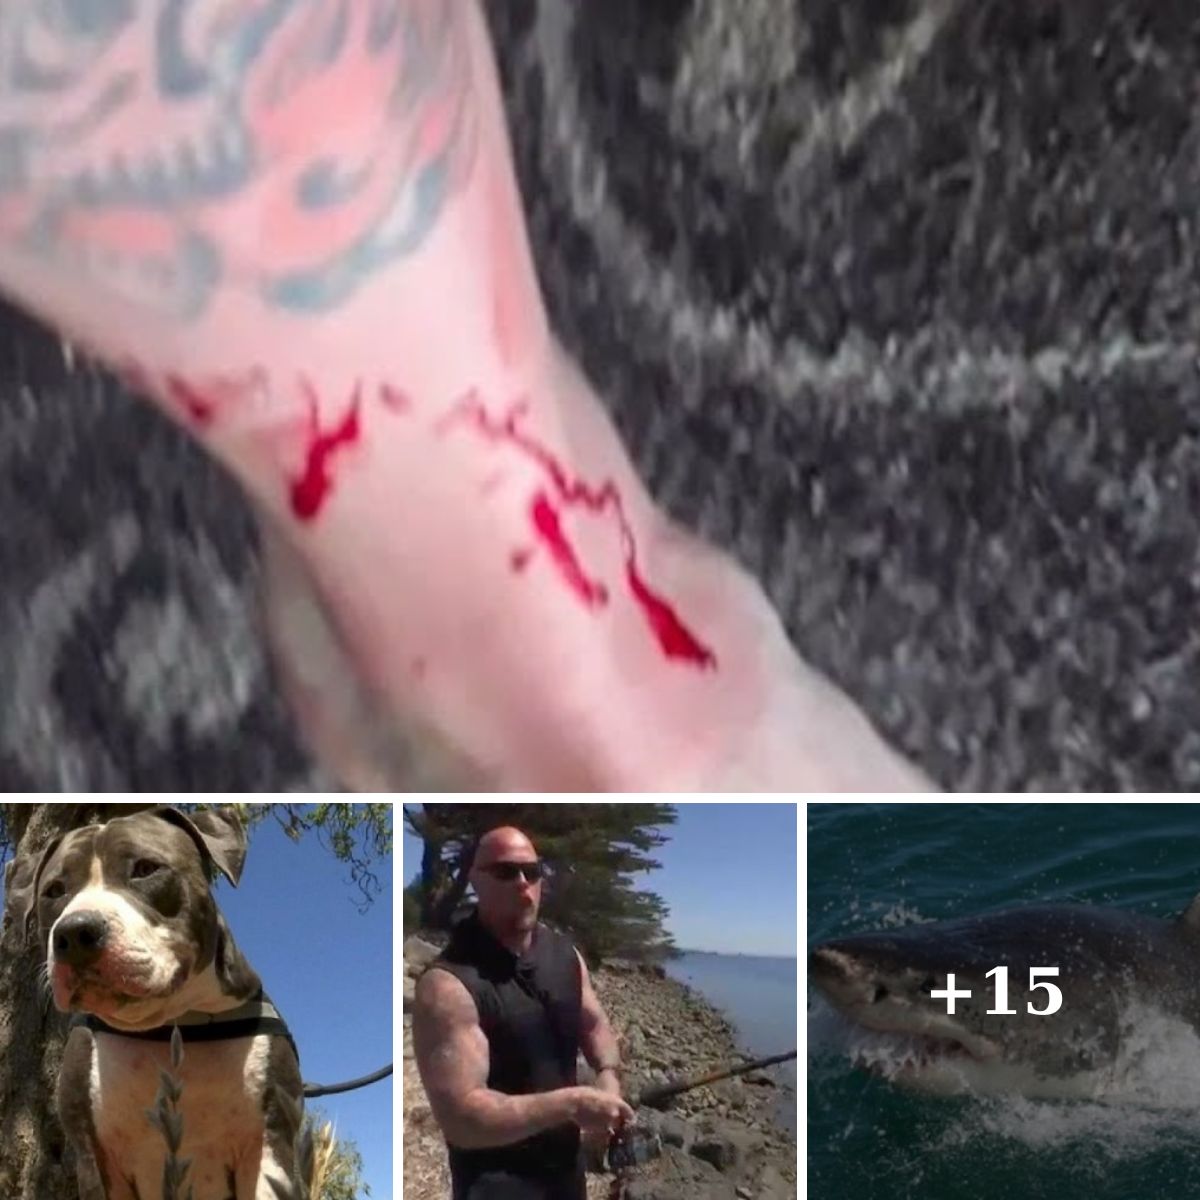 To save his owner, a pitbull fights off a 6-foot shark.